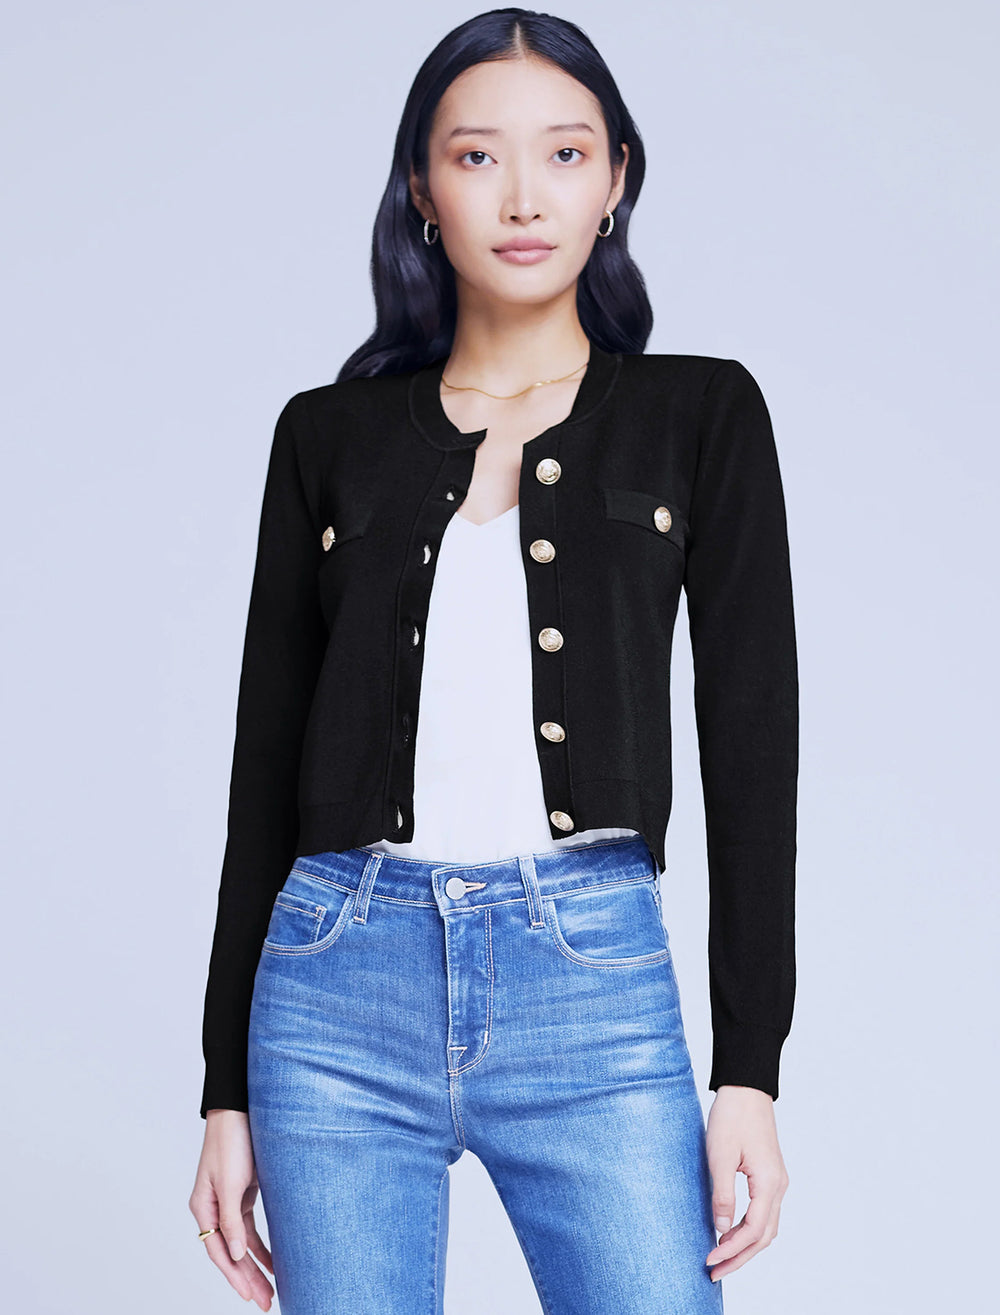 Model wearing L'agence's toulouse crop cardigan in black.